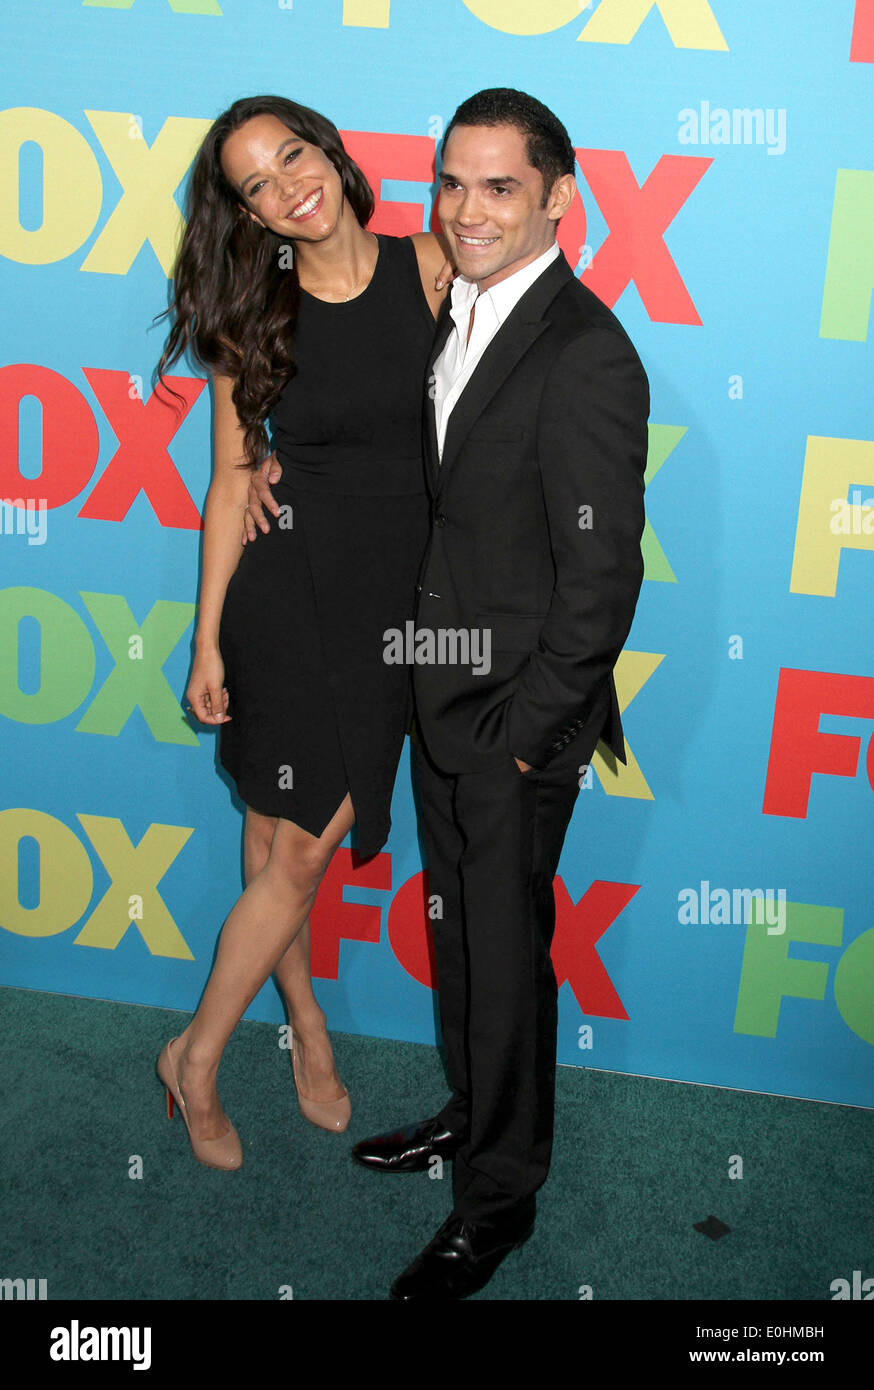 New York, New York, USA. 12th May, 2014. Actors CAROLINE FORD and REECE RITCHIE attend the 2014 FOX Upfront Presentation held at the Beacon Theater. Credit:  Nancy Kaszerman/ZUMAPRESS.com/Alamy Live News Stock Photo